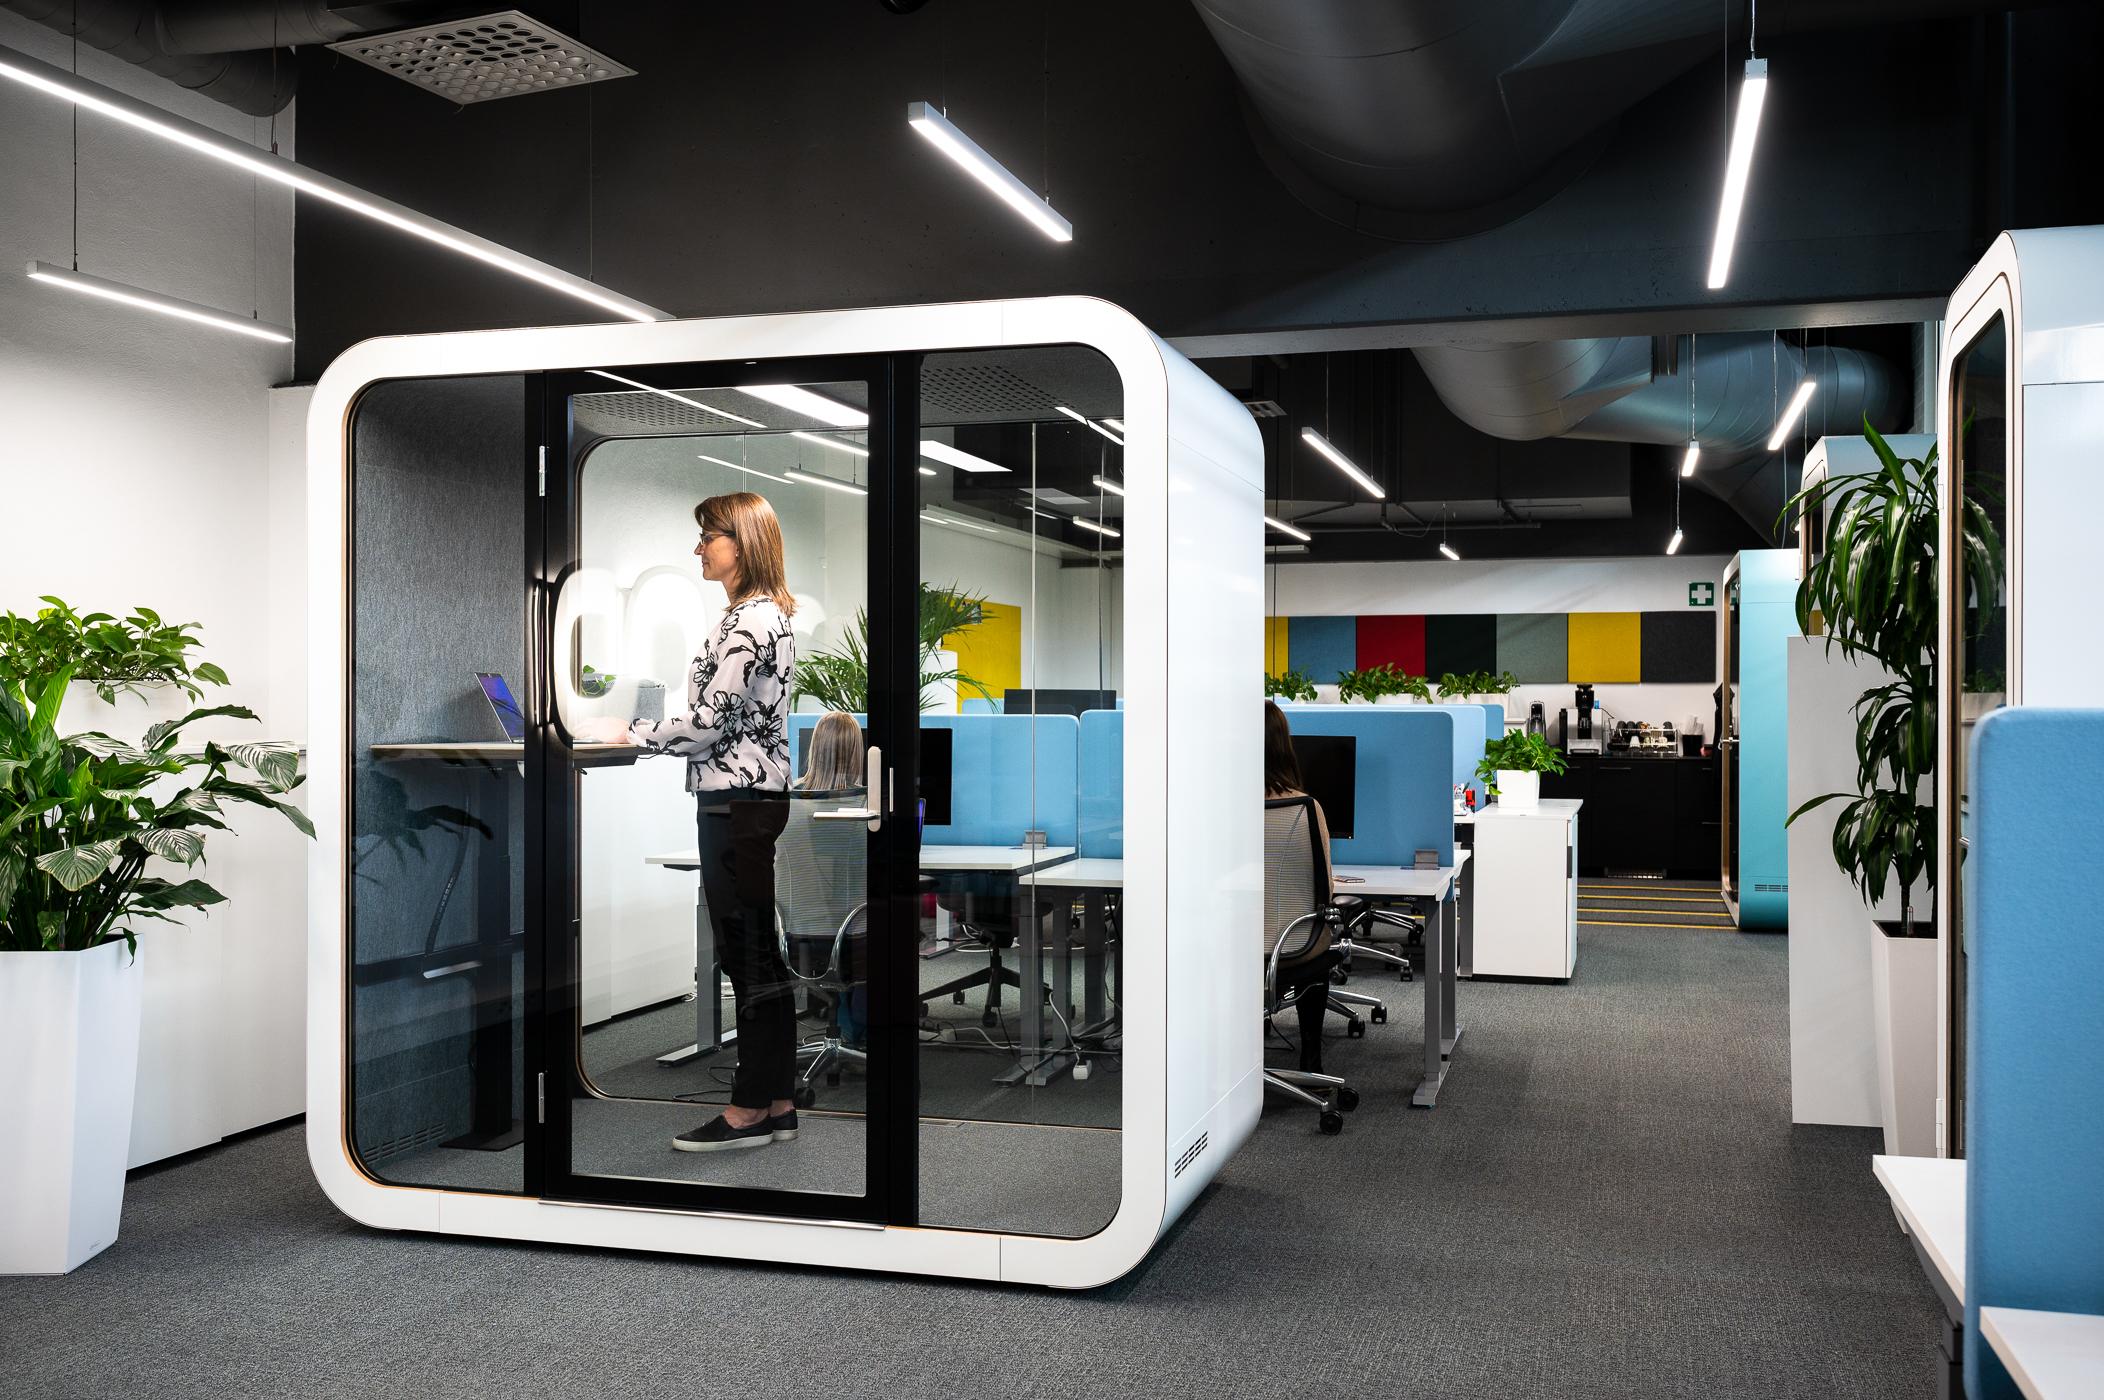 Framery Q office pod in Flow variant can support stand-up work